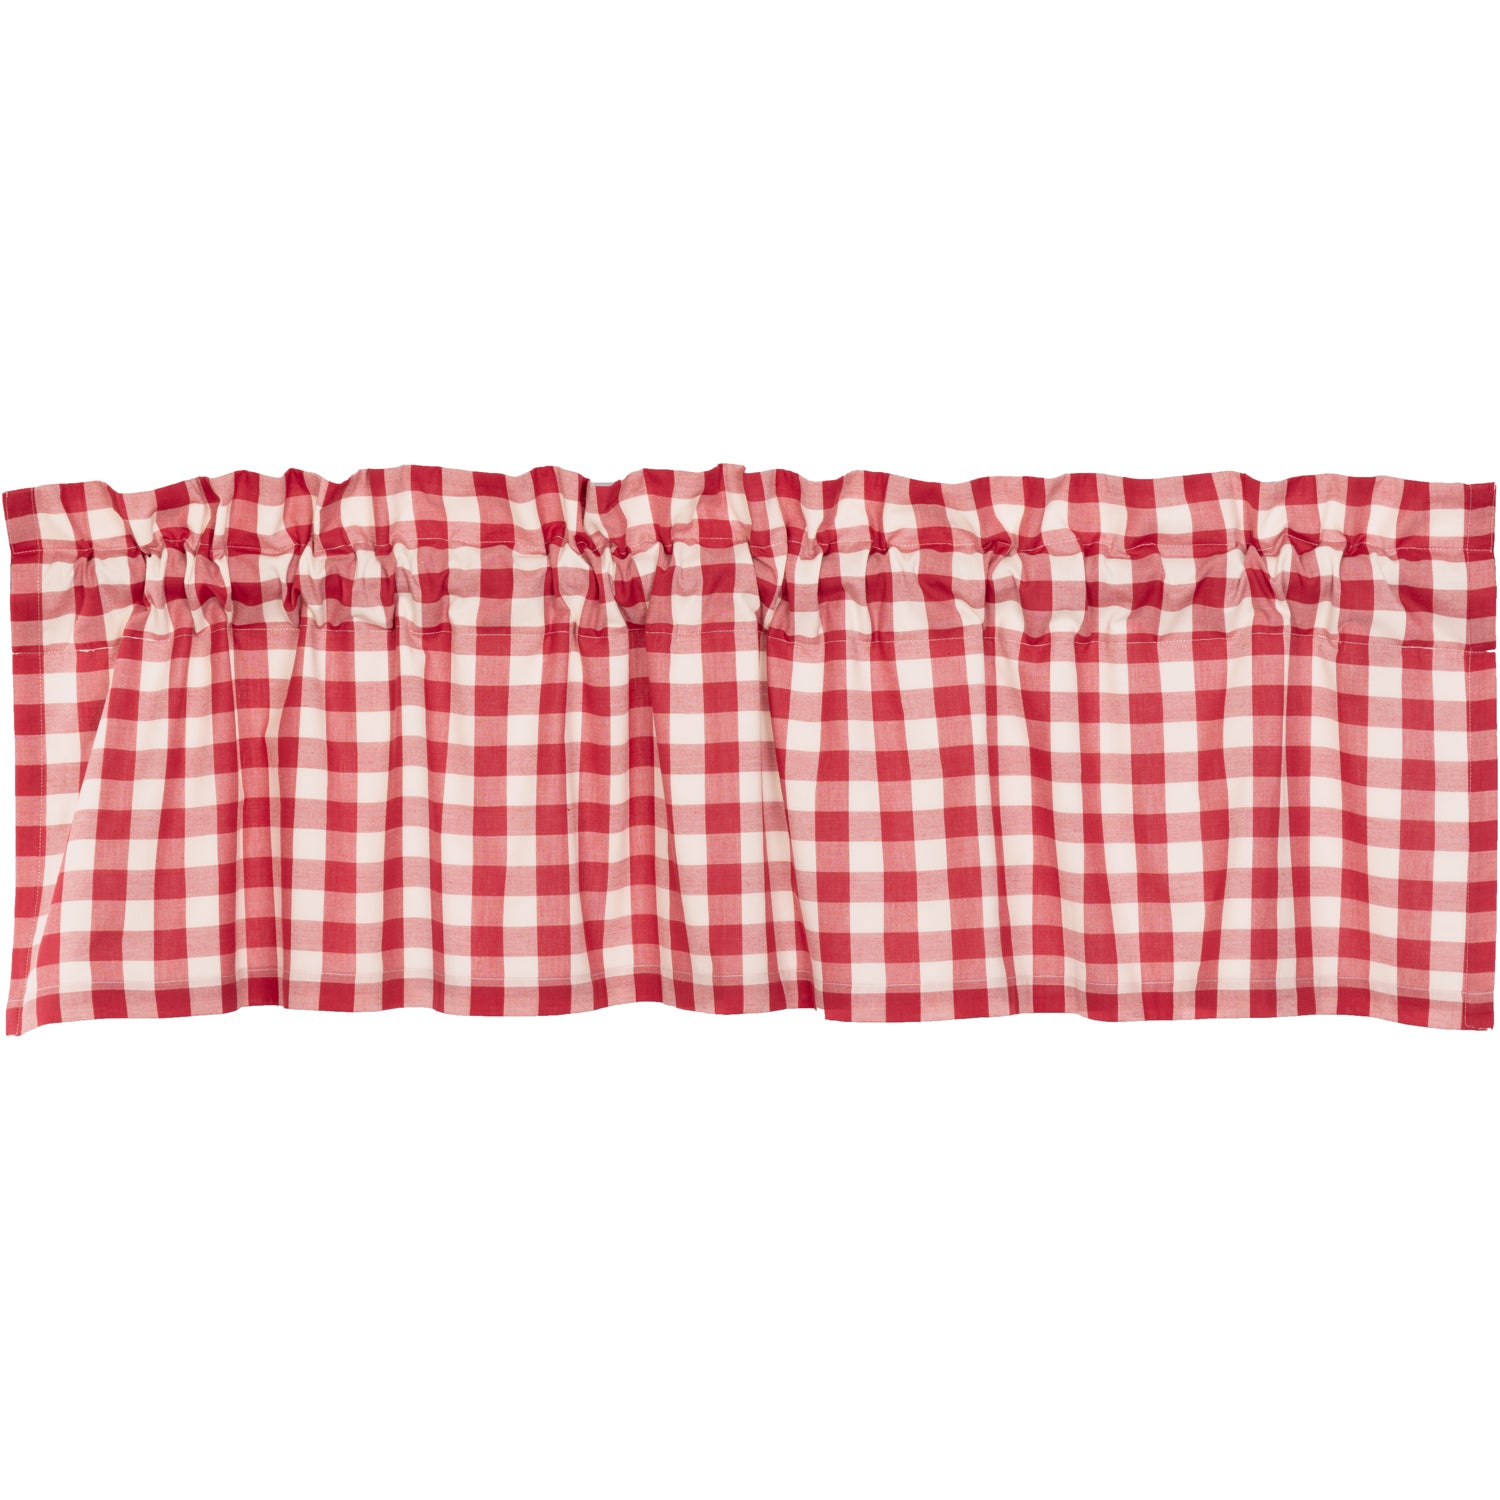 April & Olive Annie Buffalo Red Check Valance 16x60 By VHC Brands